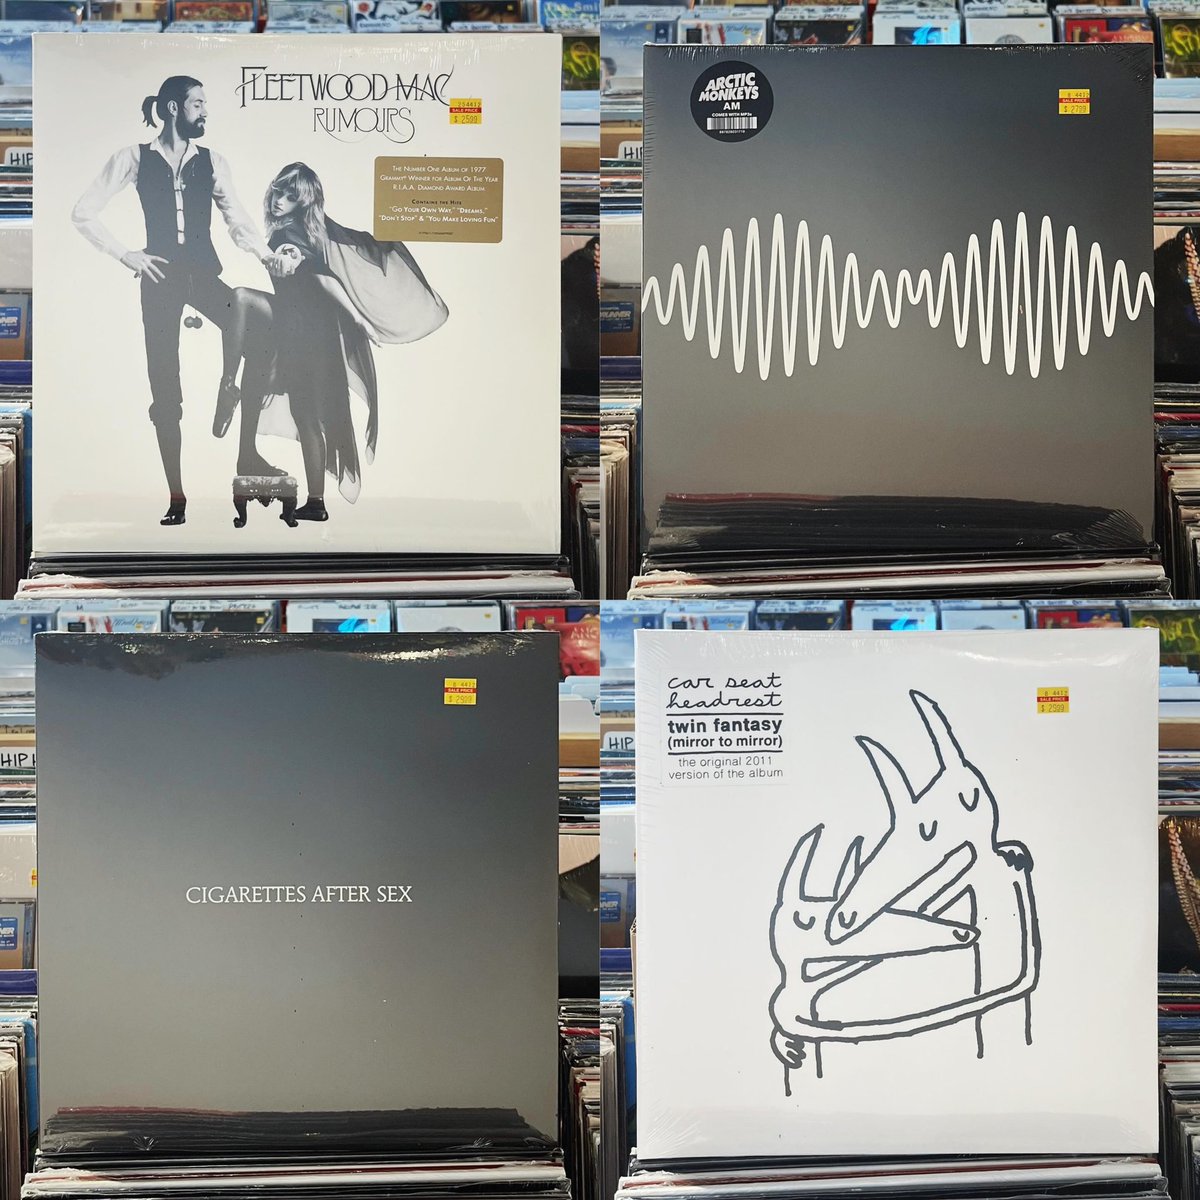 Vinyl restocks for the weekend ❗❤️‍🔥Titles from Title Fight, Elliot Smith, Wu-Tang Clan, Fleetwood Mac, Car Seat Headrest, and more. 
#backinstock #restocks #shopsmall